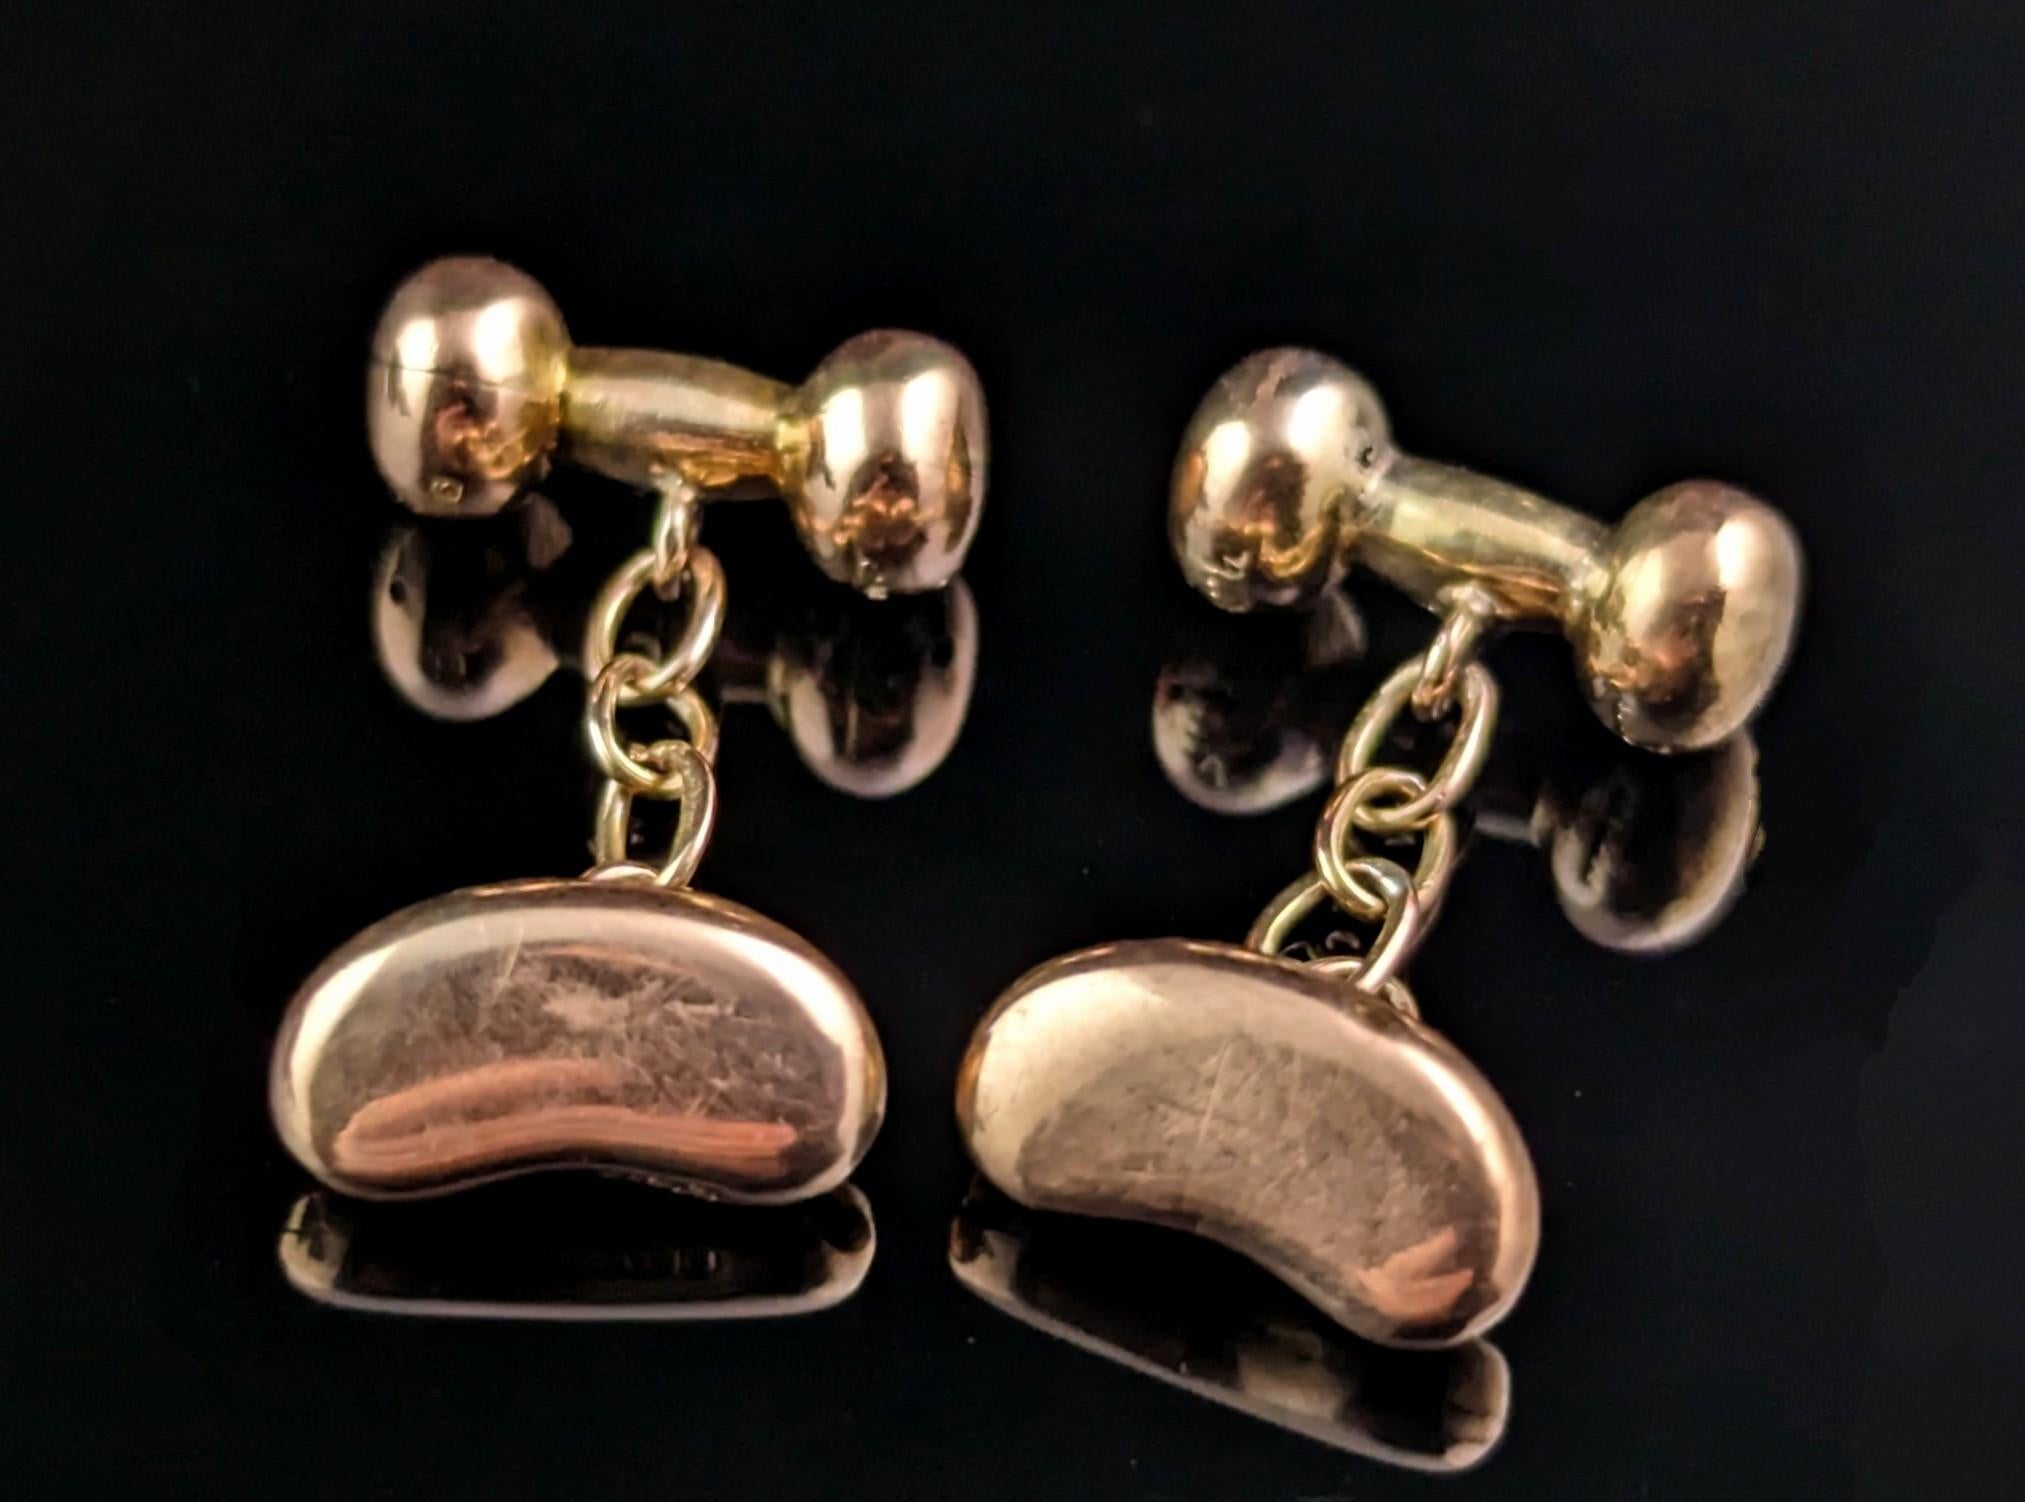 A fantastic pair of antique Edwardian era 9ct Rose gold lucky bean cufflinks.

They feature a modelled rose gold lucky bean to one end and are attached to a ball and barbell anchor with a short gold chain.

The cufflinks are stamped and marked in